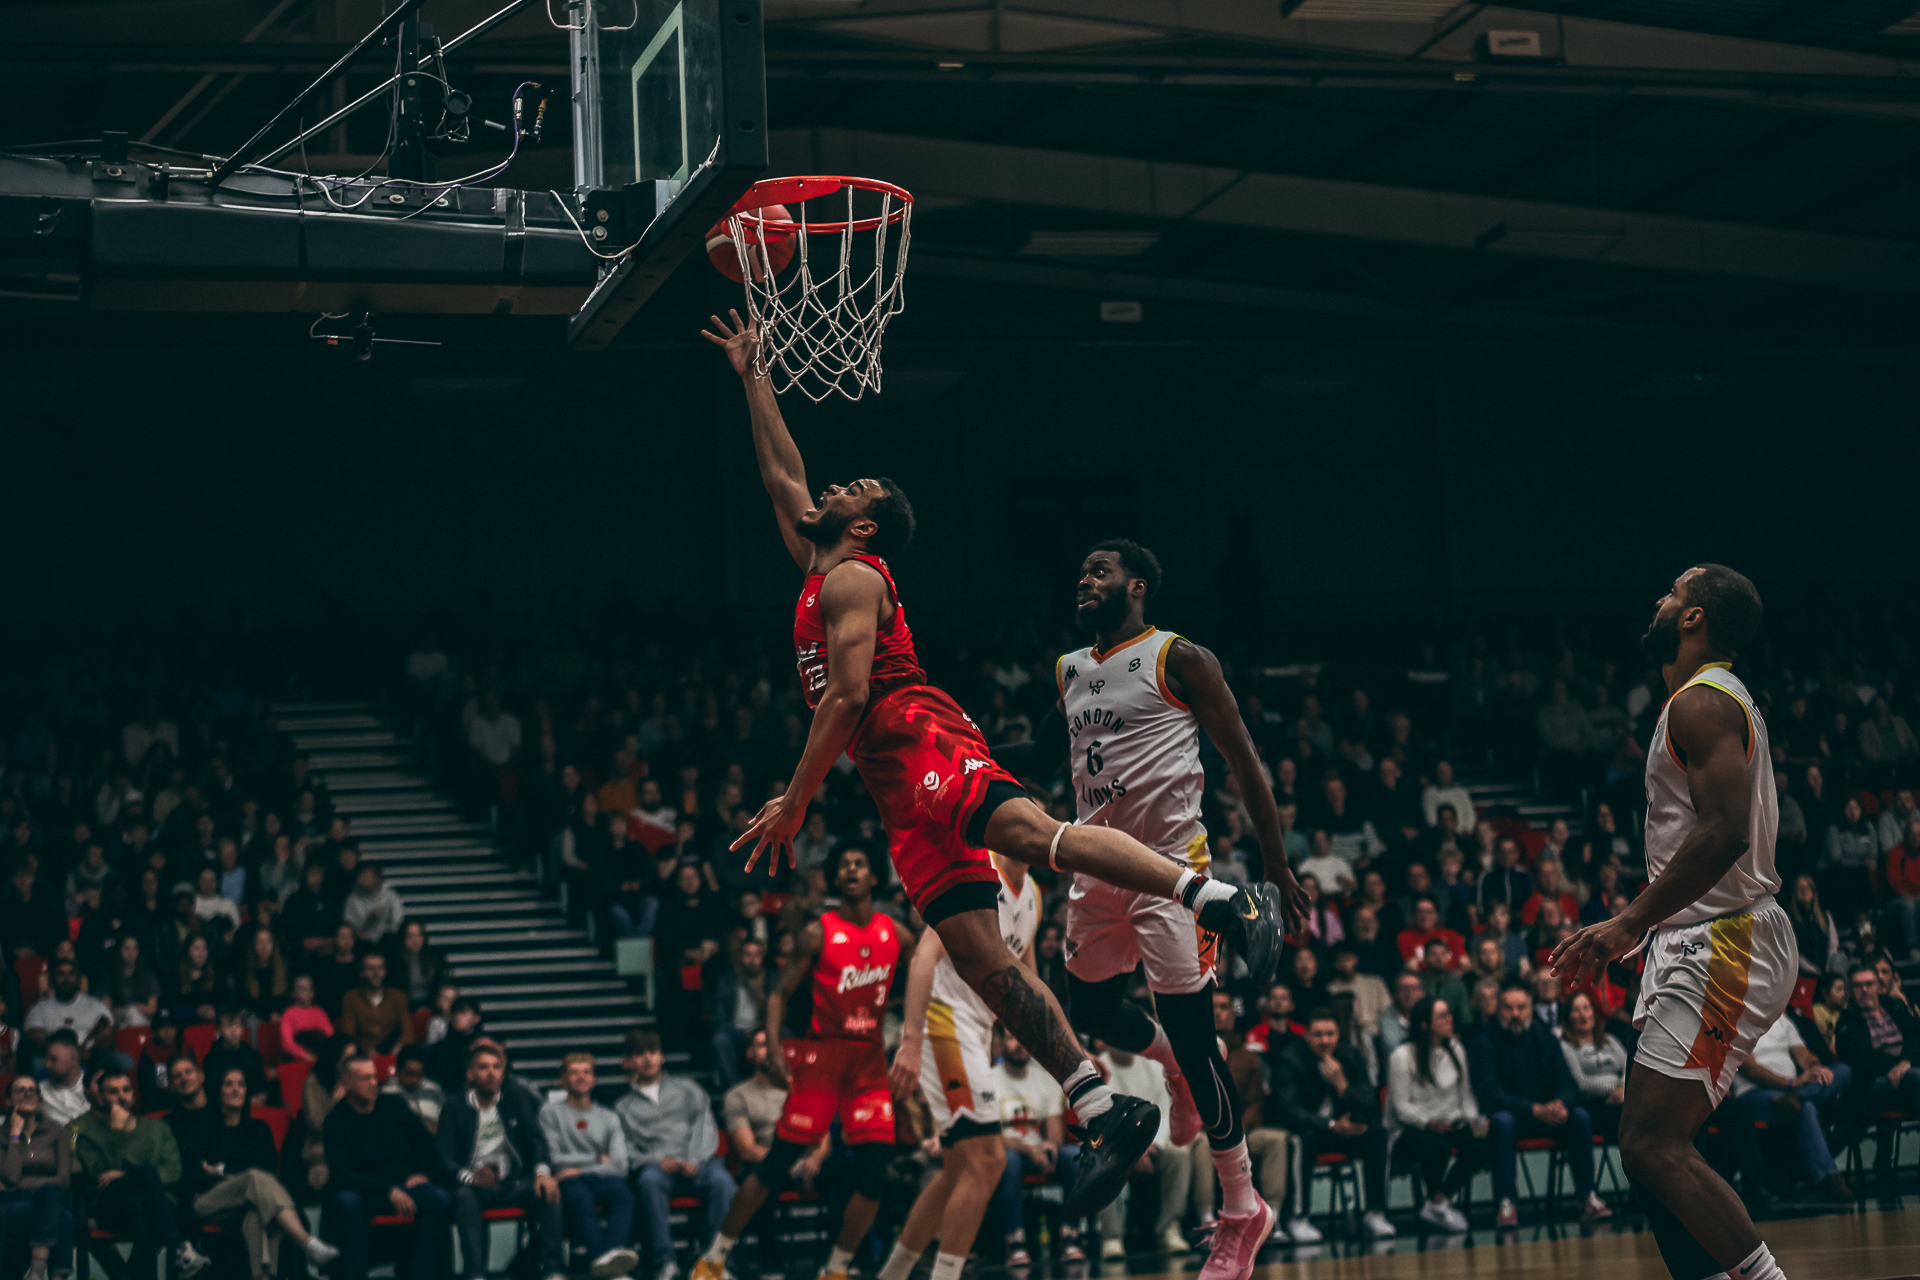 Scouting Report: London Lions